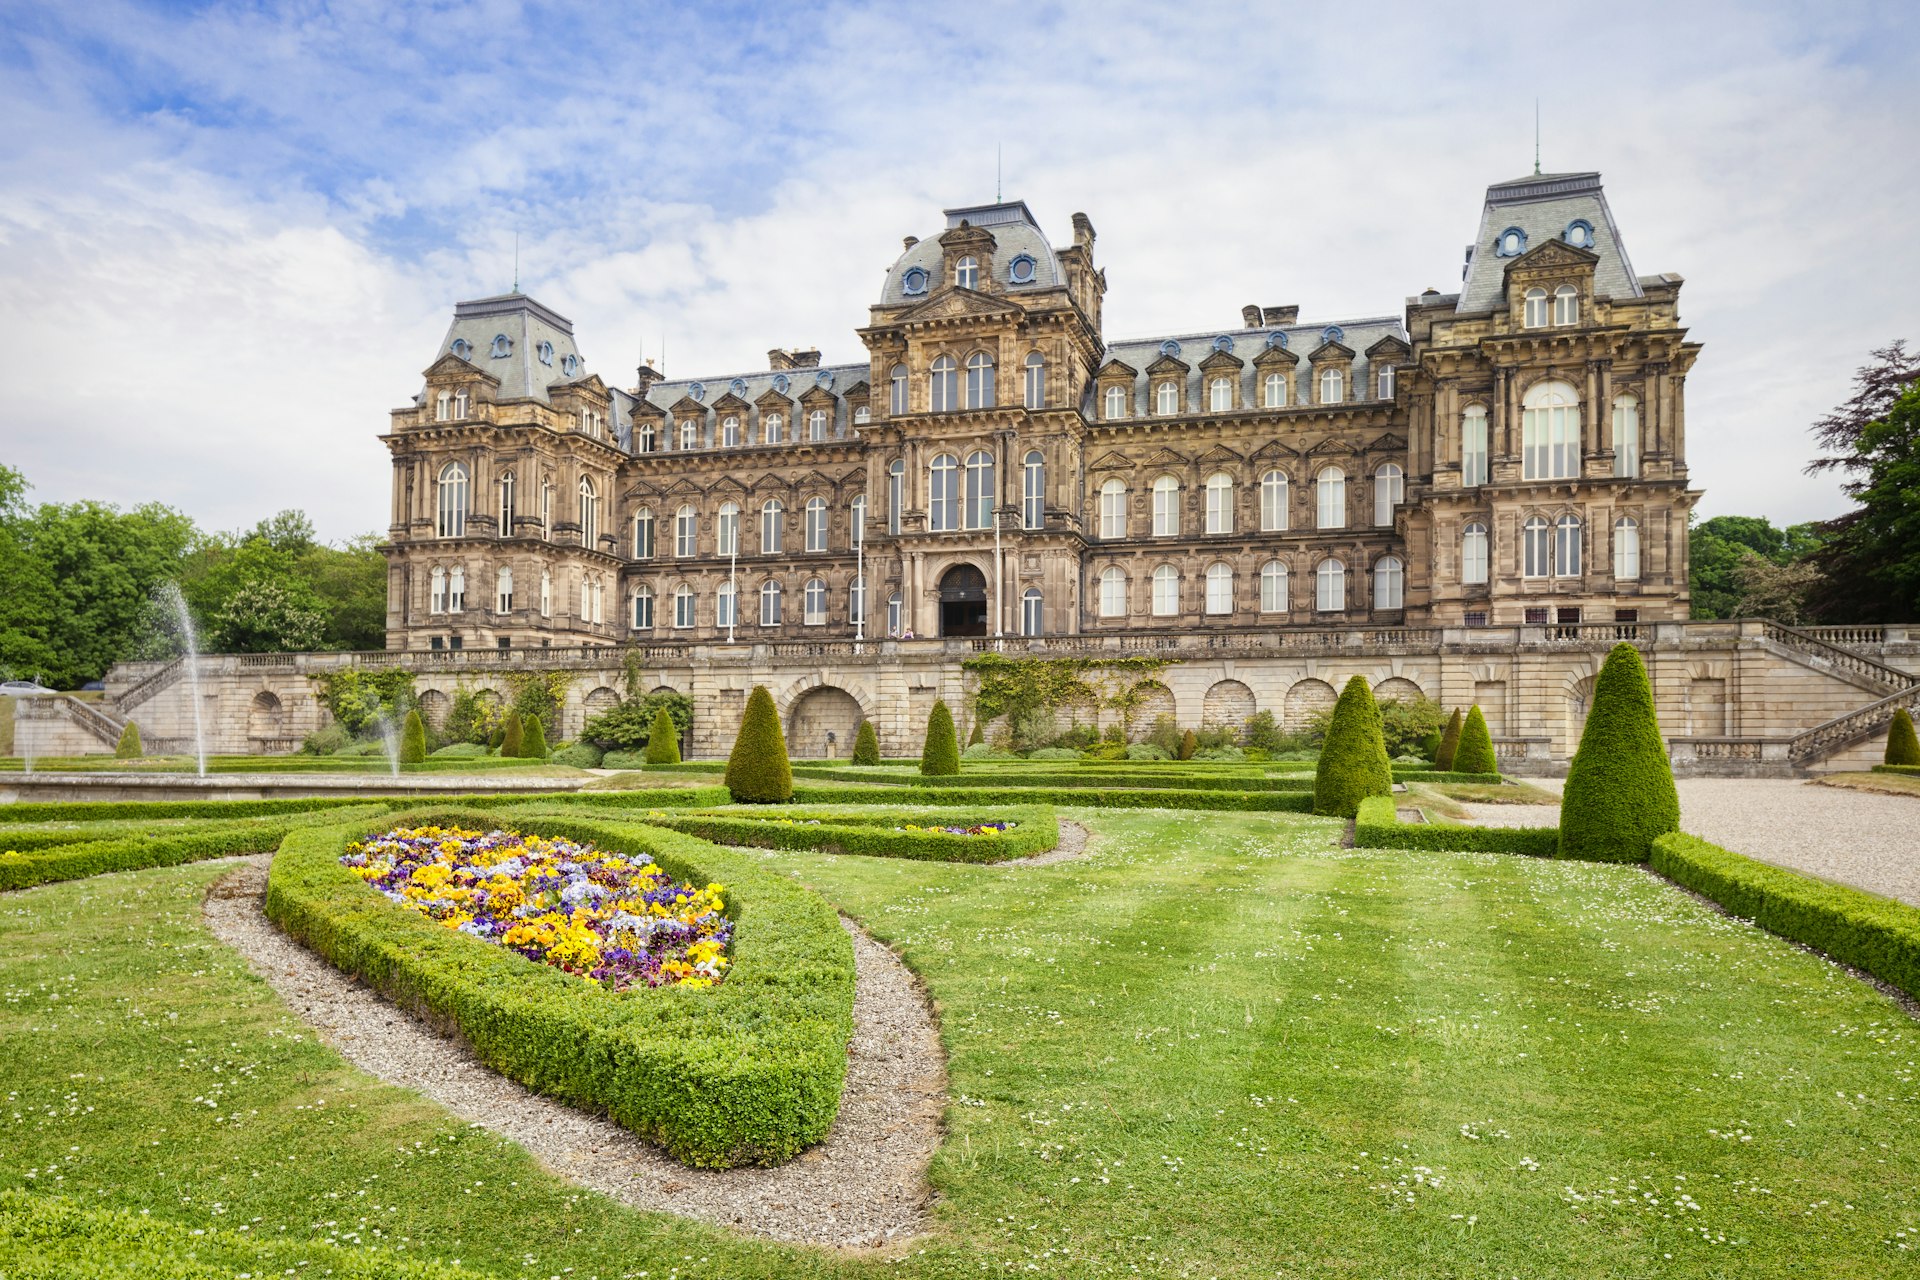 The exterior of a grand palatial building with manicured lawns and pretty flowerbeds